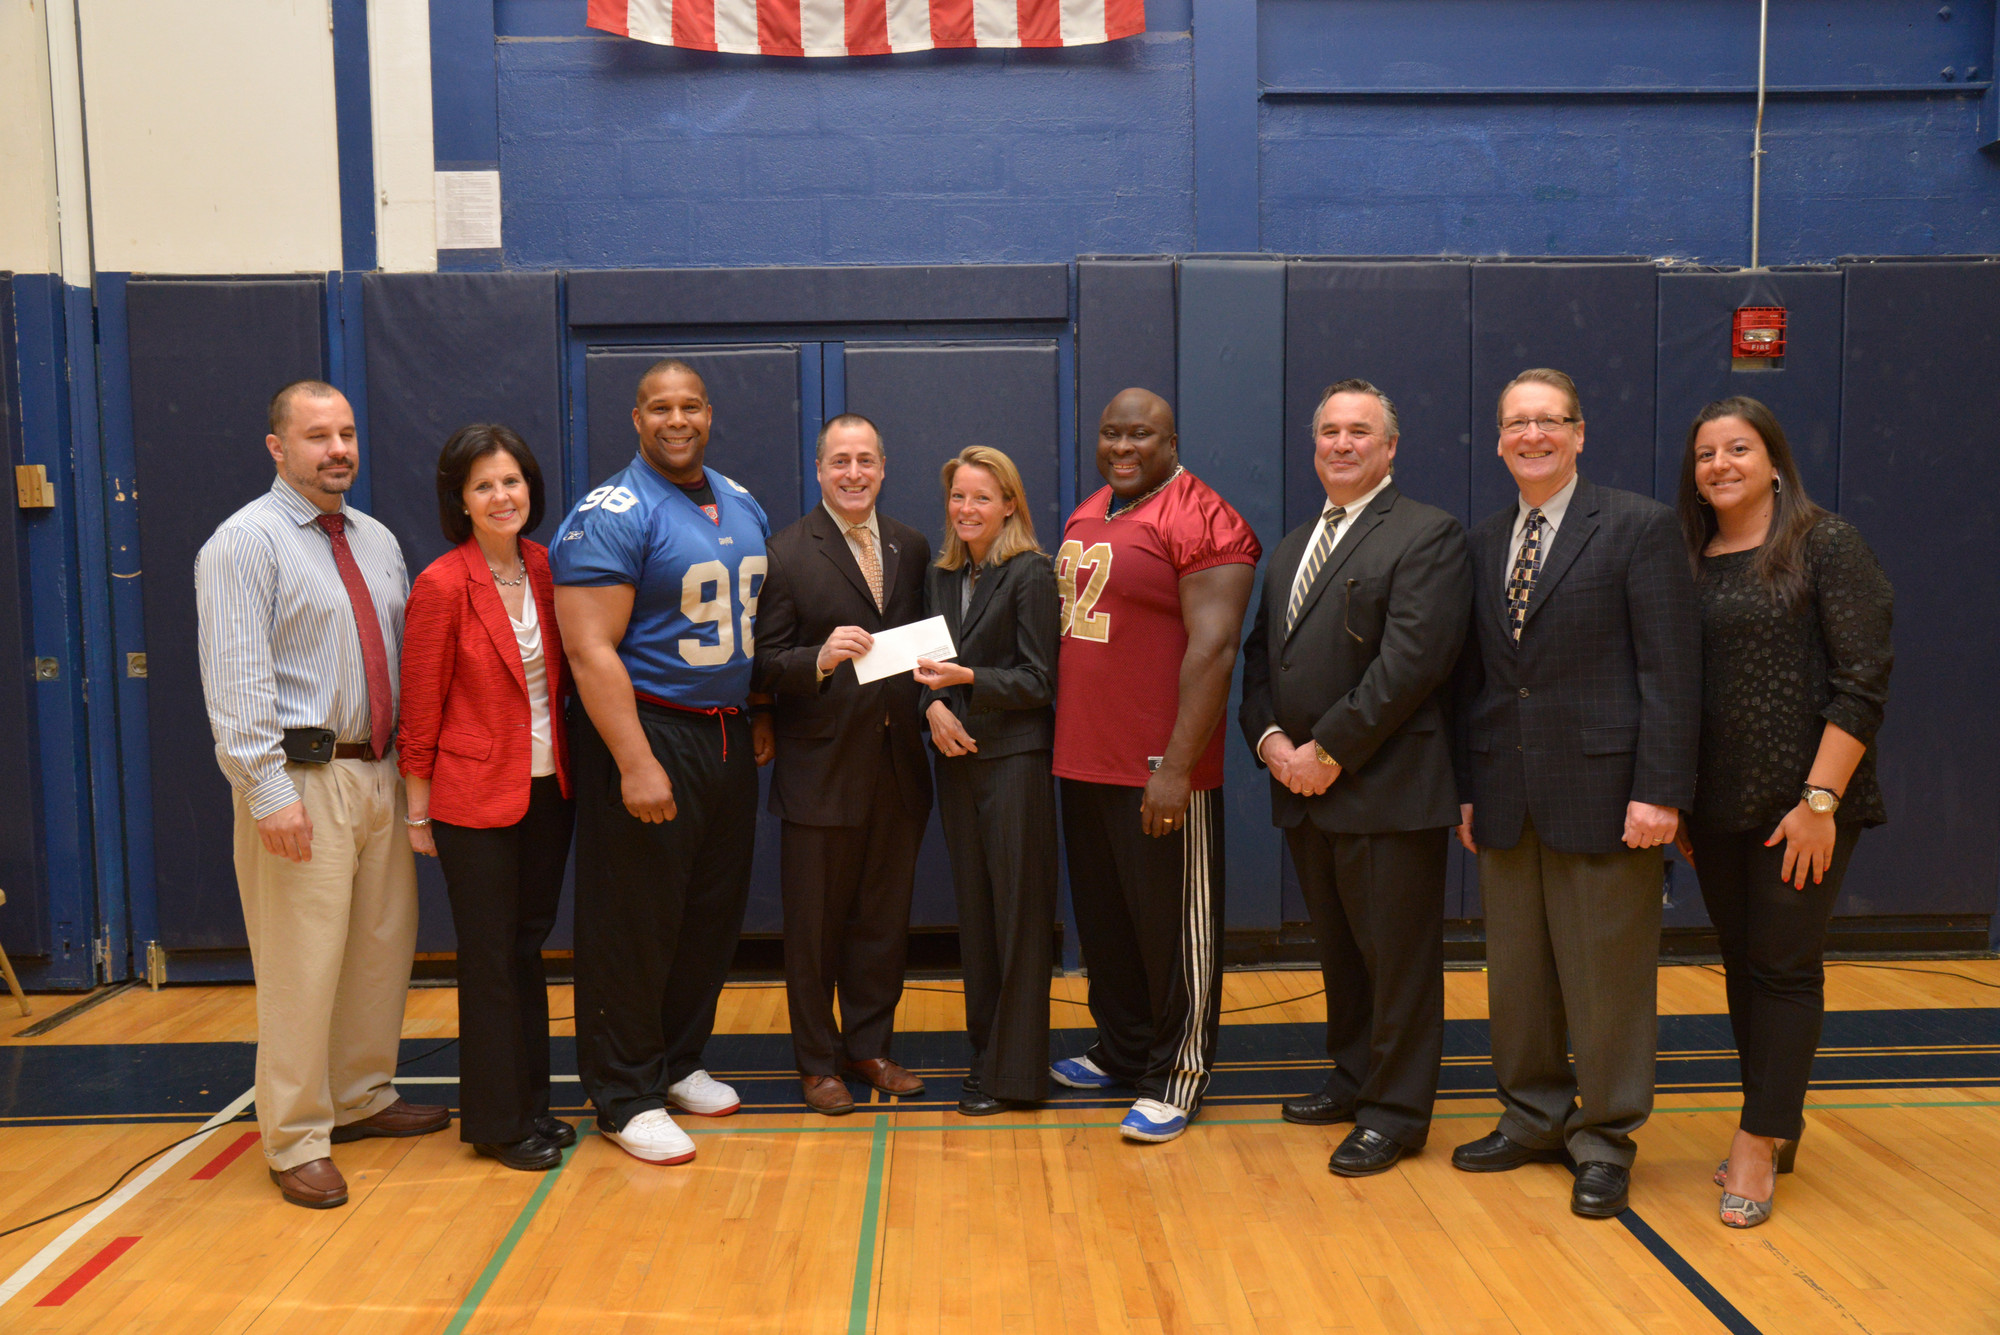 Ed Ramirez, BHS Athletic Director, left, with Pat Banhazl (School to Careers administrator), Keith Davis, Assemblyman Brian Curran, Molloy College Athletic Director Susan Cassidy-Lyke, Clarence Lee, Jim Scannell, Richard Miskiewicz (BHS assistant principal) and Helen Kanellopoulas. Molloy was presenting a check to BHS.